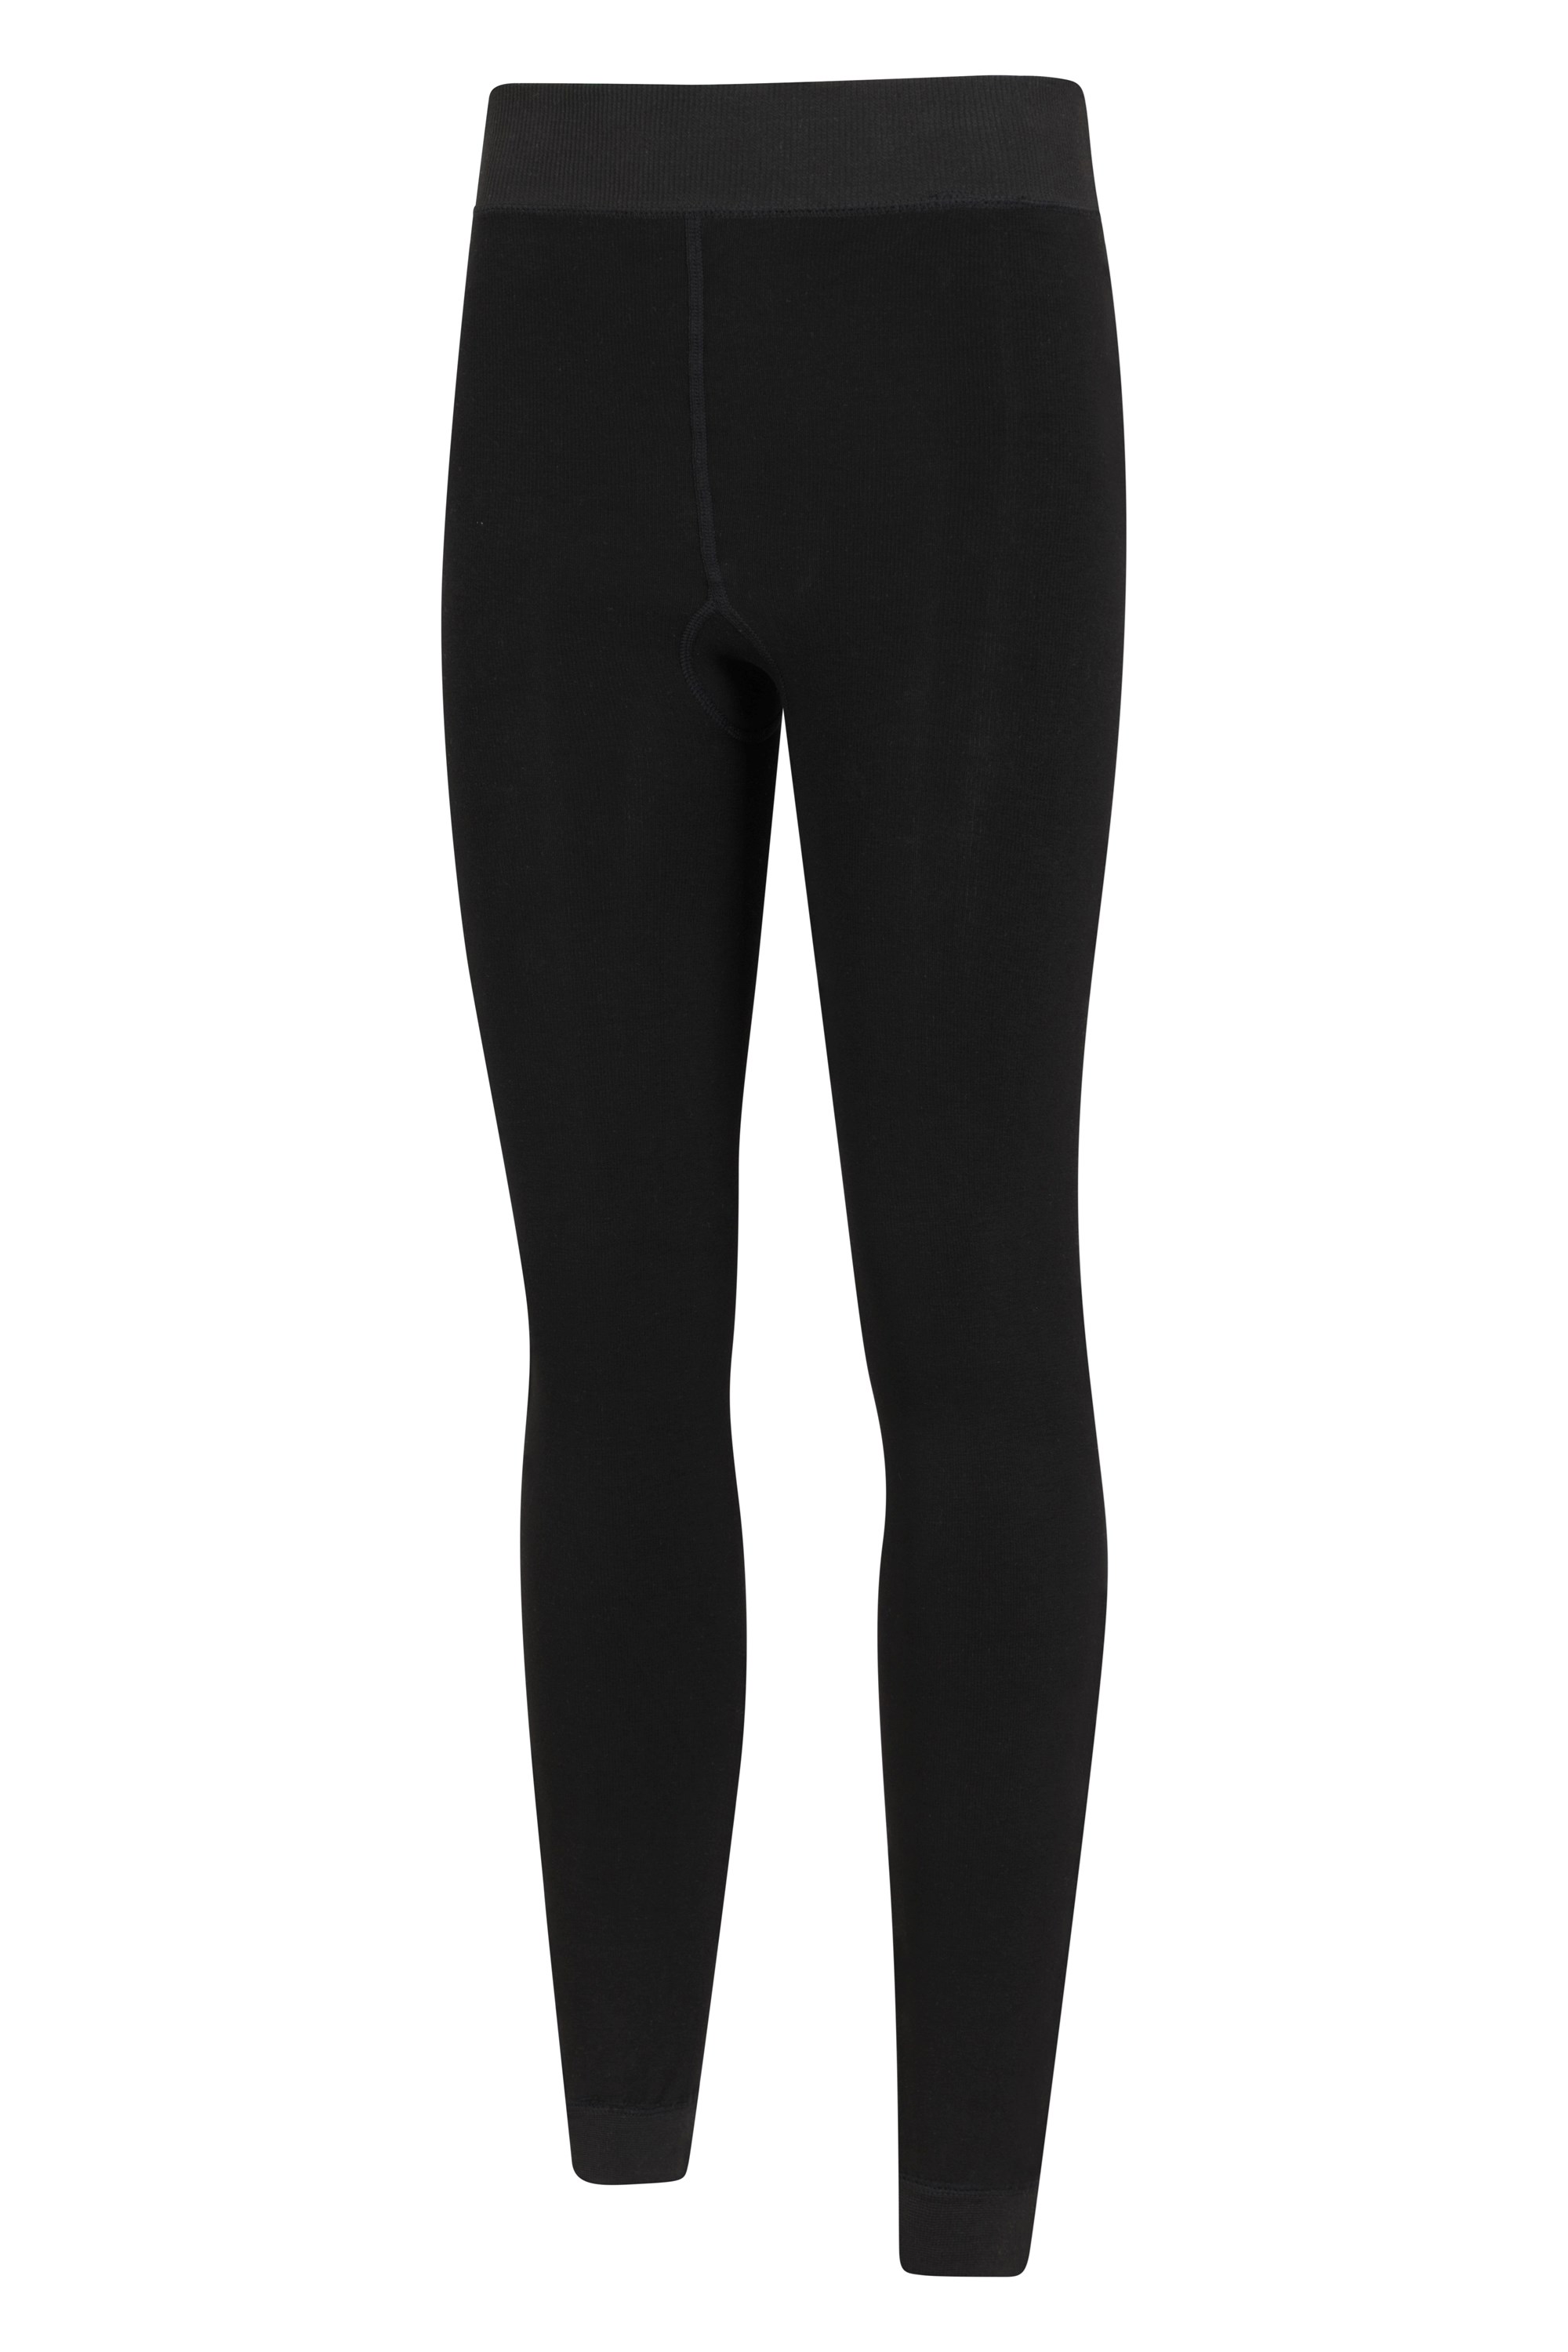 Up To 80% Off on Women Fleece Thermal Tights S